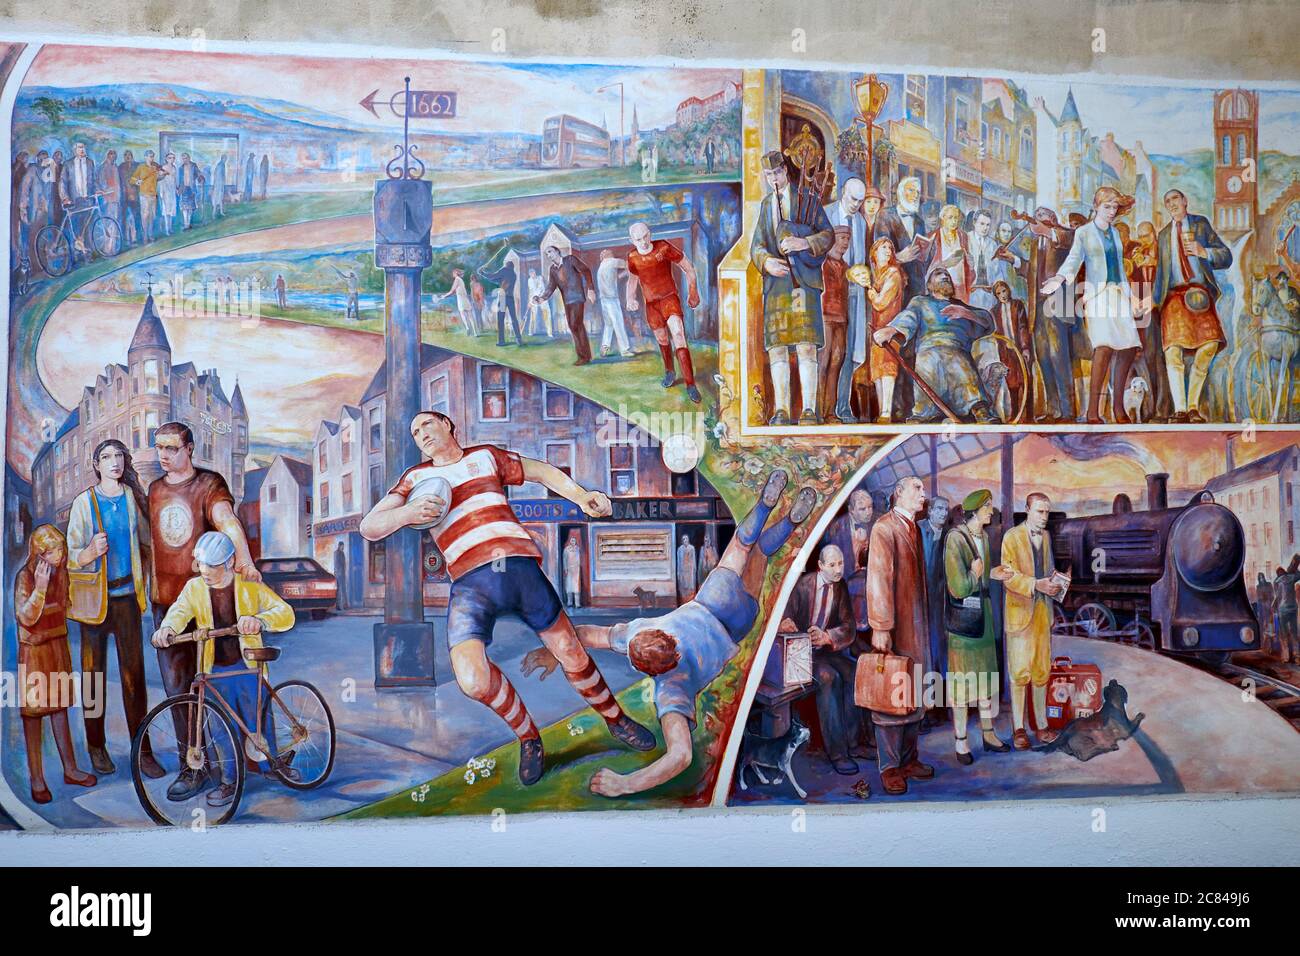 Wall mural painted by Michael Jessing portraying the town of Peebles cultural history dating from the year 1200 up to the present day. Stock Photo